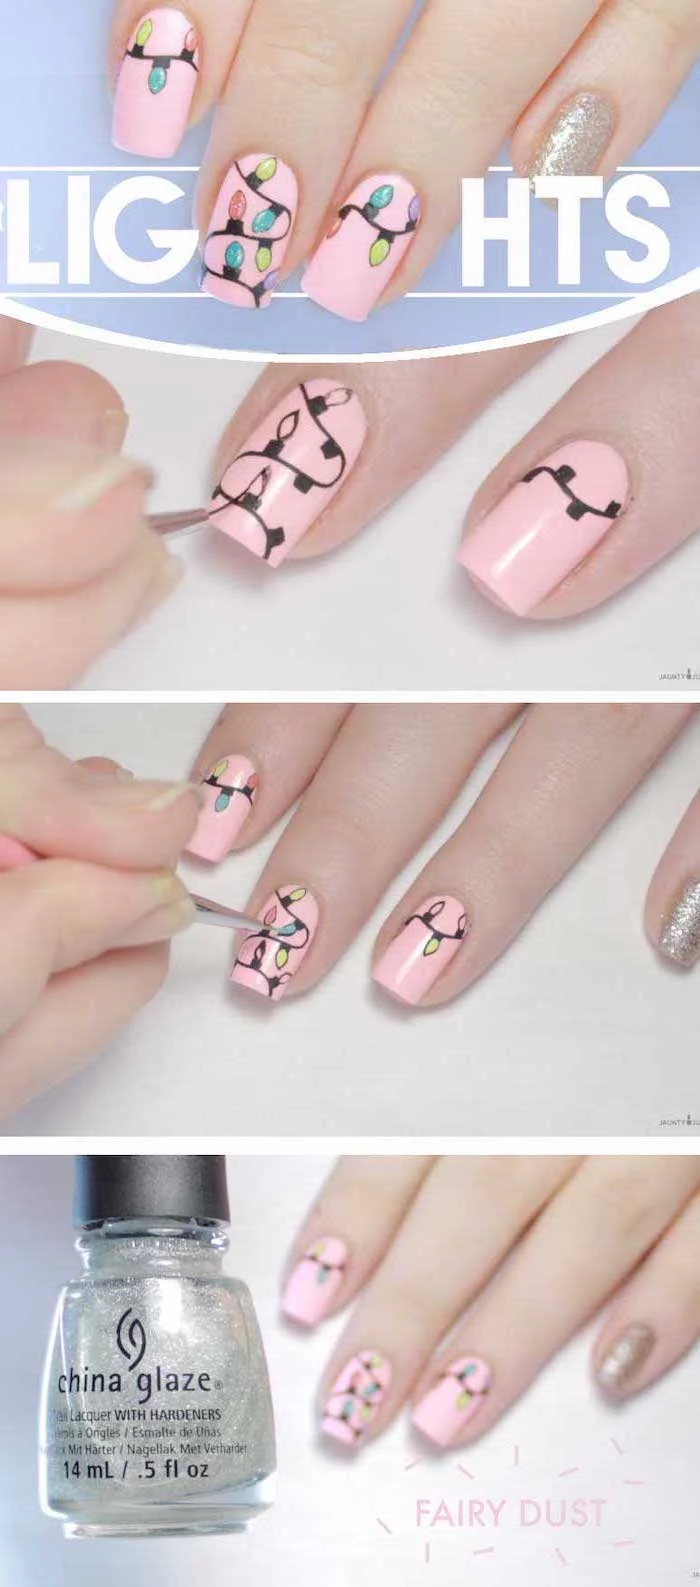 photo collage of step by step diy tutorial, different color nails, christmas lights decorations on each nail, pink nail polish